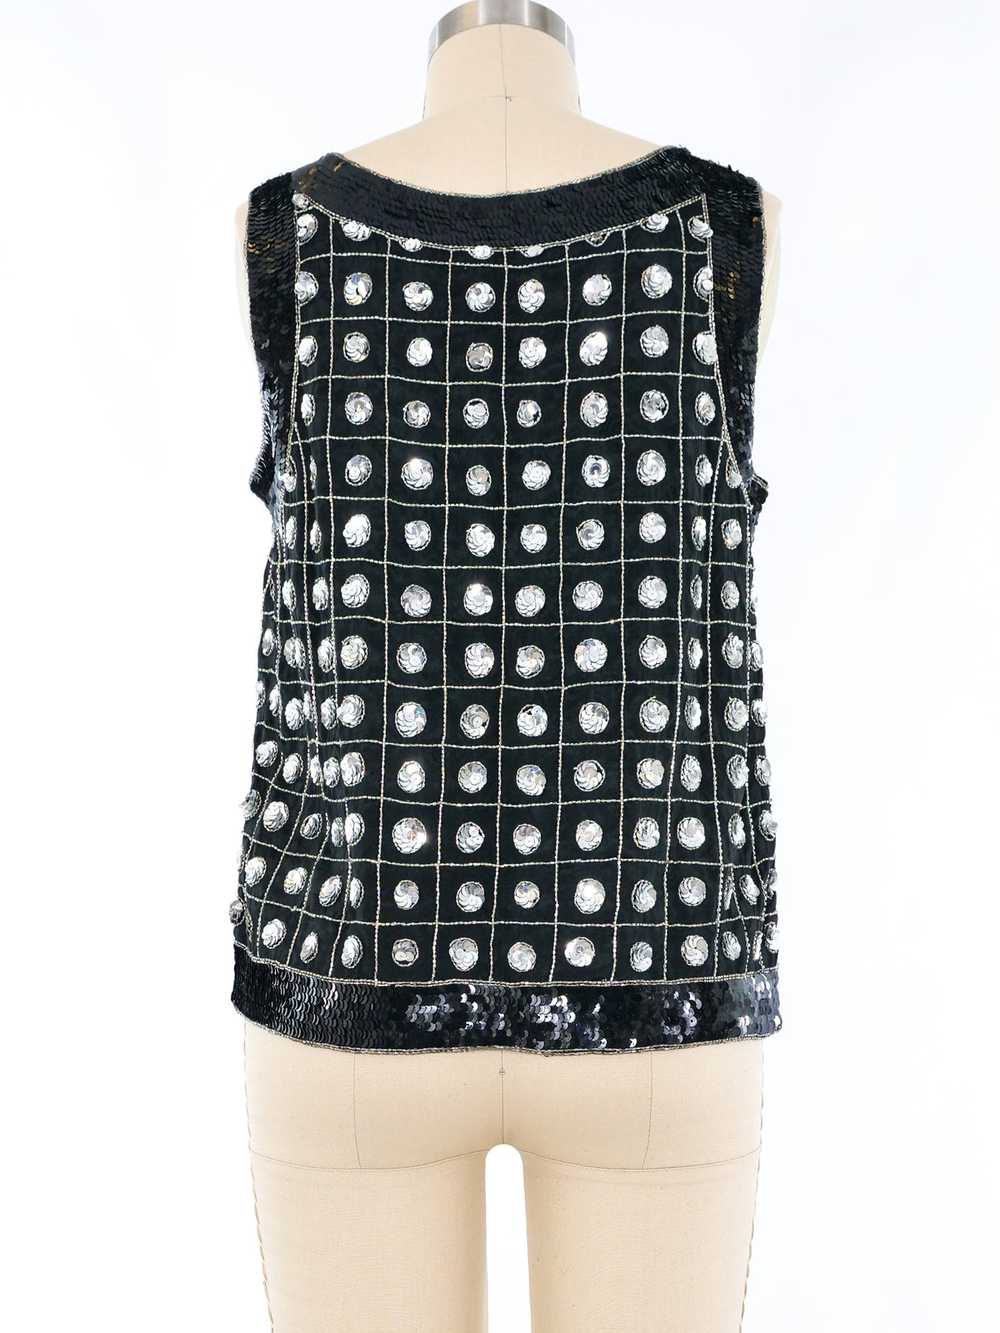 Bead and Sequin Embellished Tank - image 4